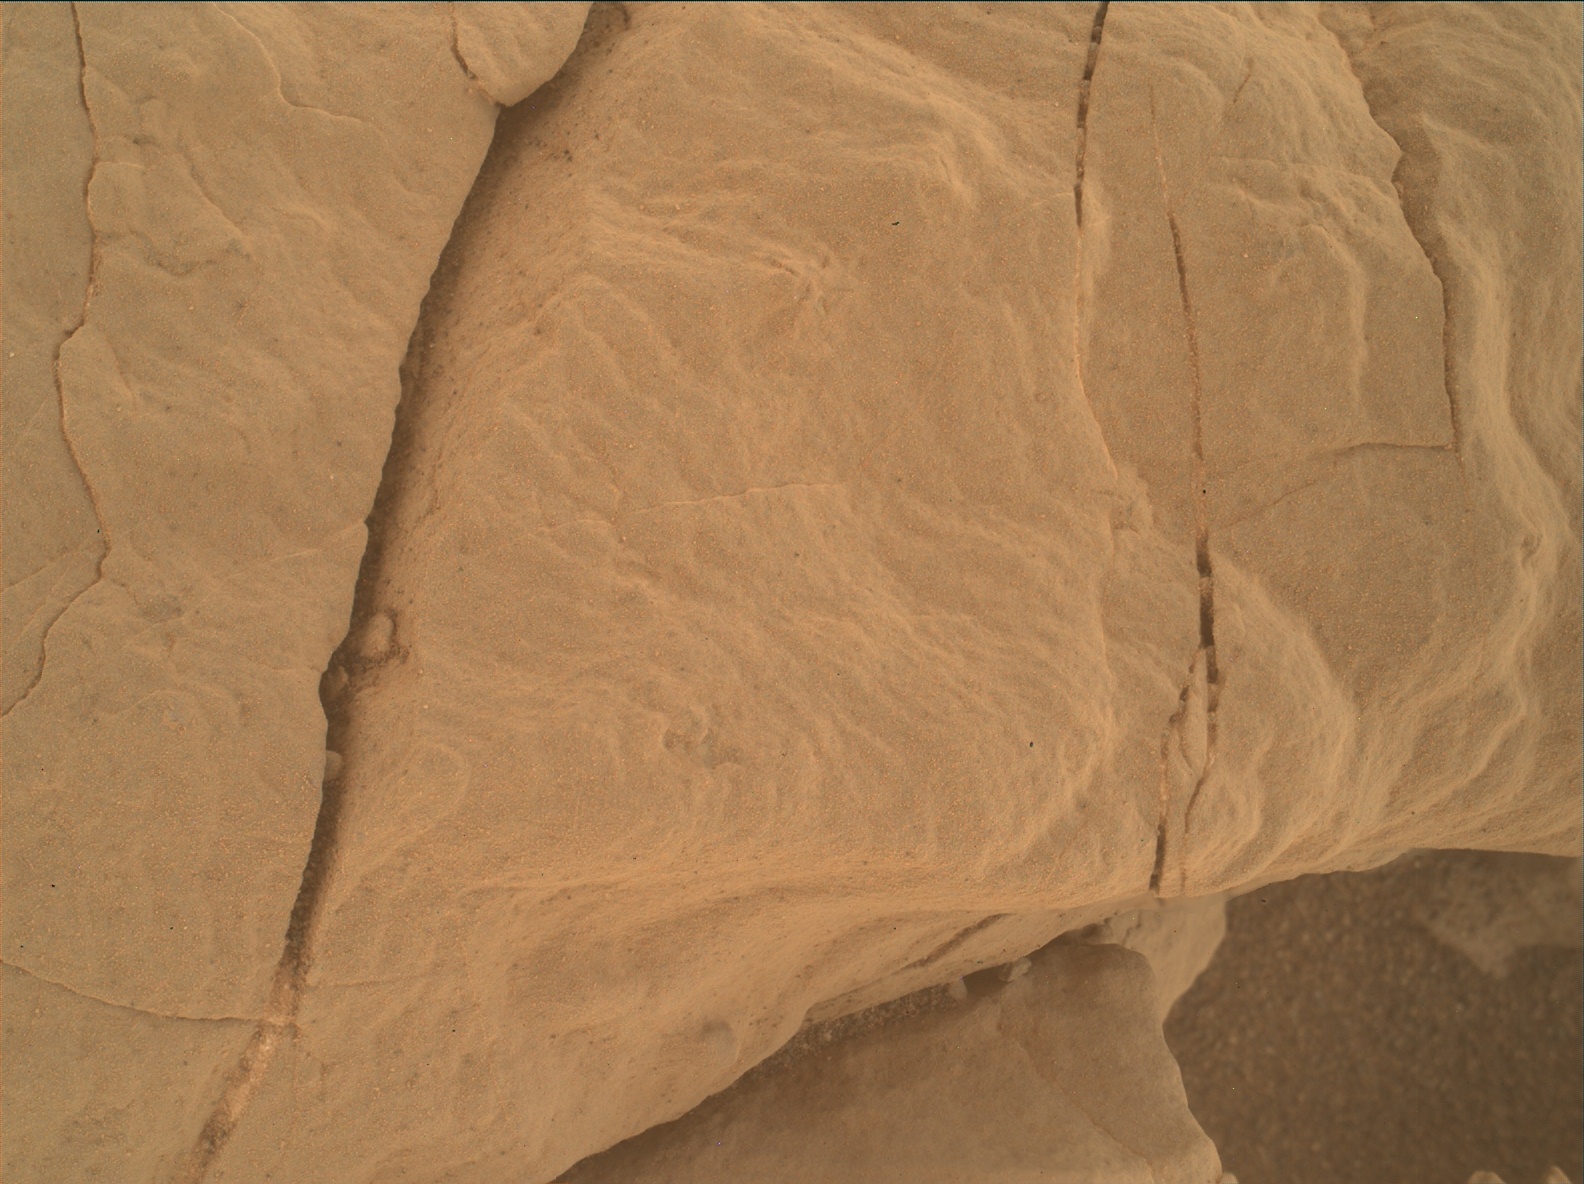 Nasa's Mars rover Curiosity acquired this image using its Mars Hand Lens Imager (MAHLI) on Sol 2647